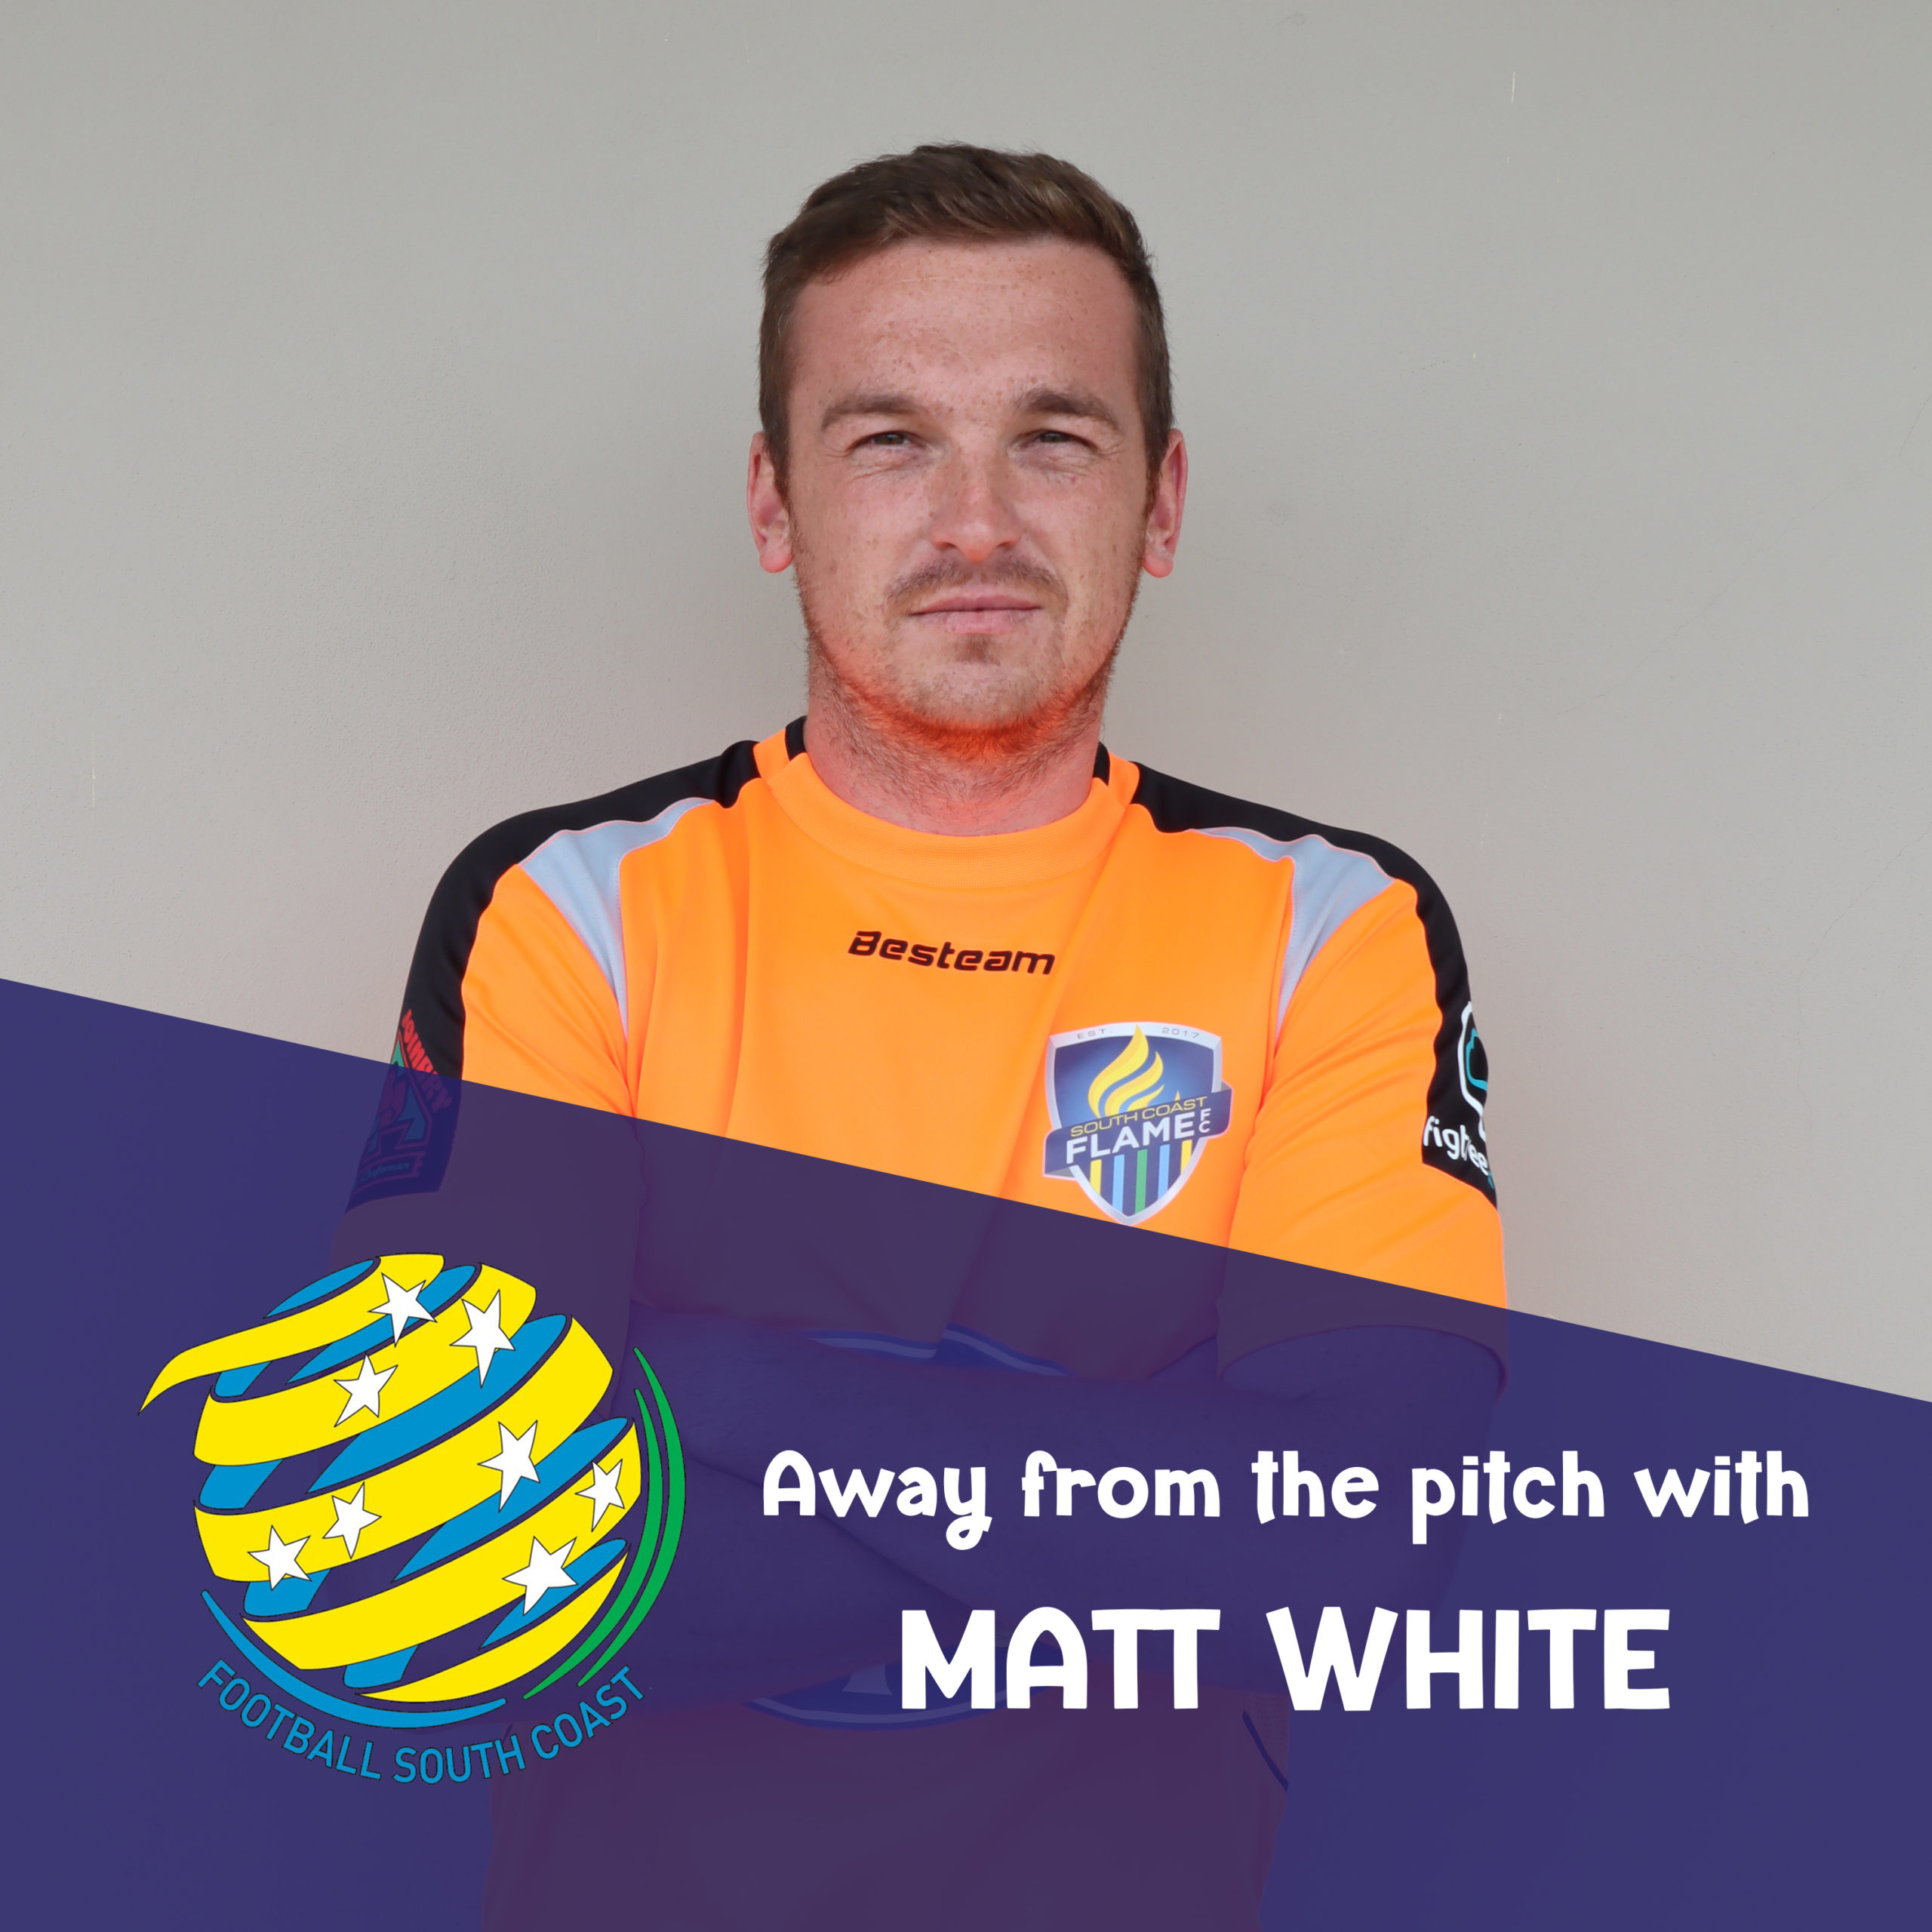 Away from the pitch with Matt White artwork